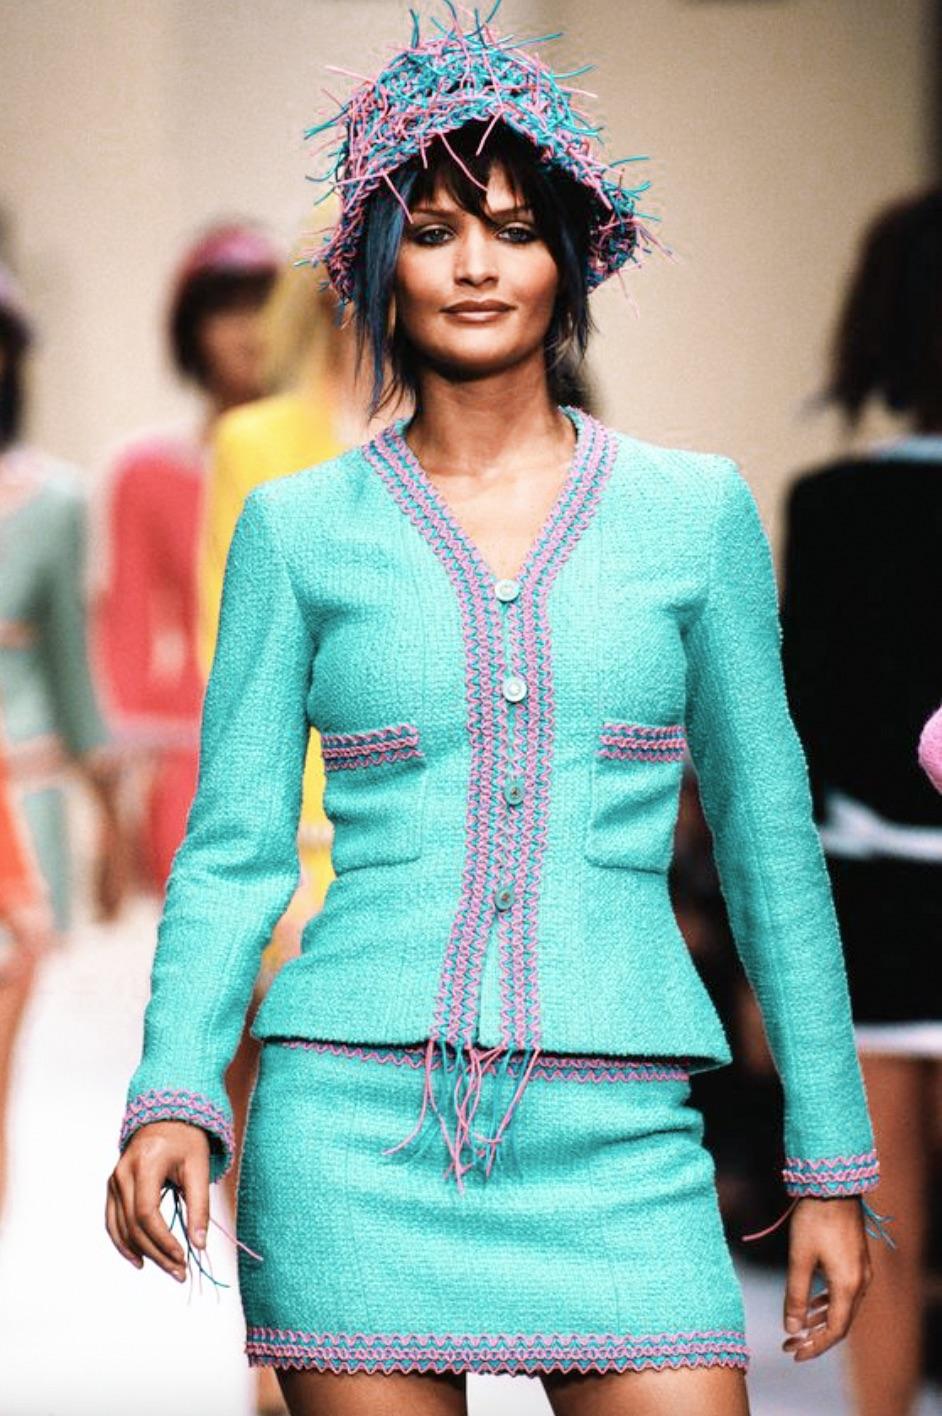 Introducing a rare and highly sought-after piece from Chanel's iconic Spring/Summer 1994 collection - the breathtaking turquoise 